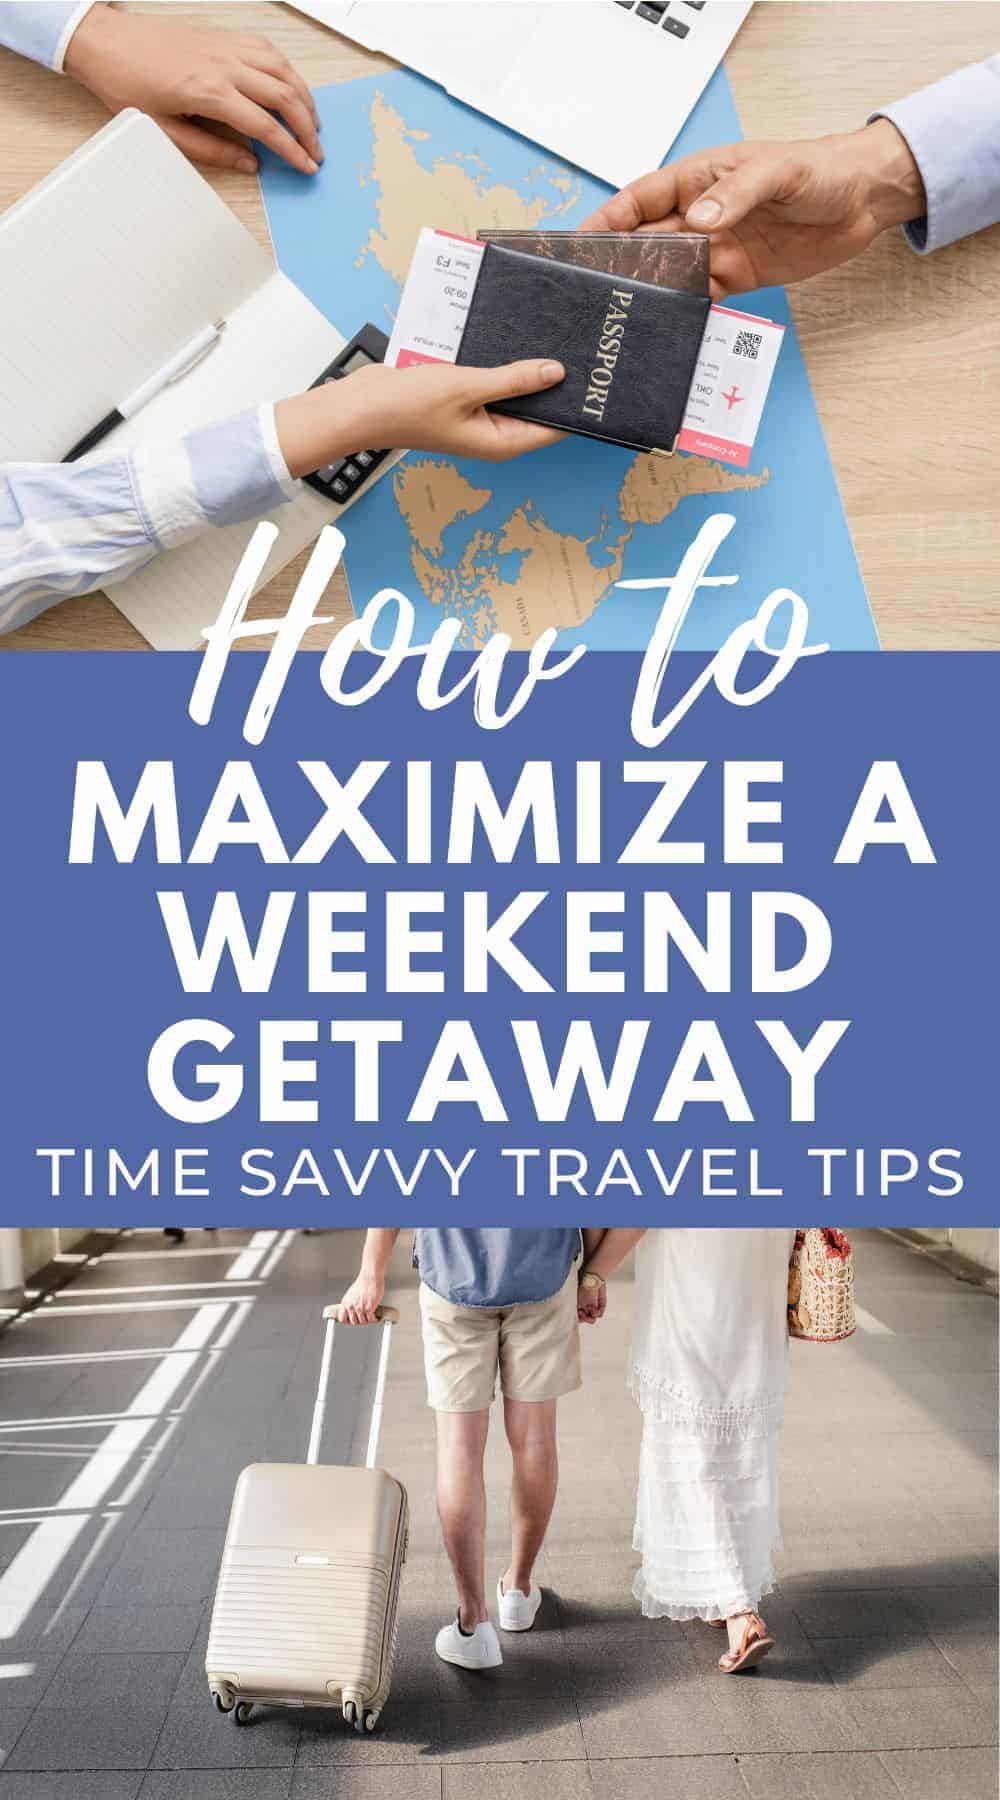 Pinterest image with two photos, one of one person getting handed a passport and documents and the other is of a man and woman walking. The man is rolling a small suitcase. The text on the image reads, "how to maximize a weekend getaway, time savvy travel tips."